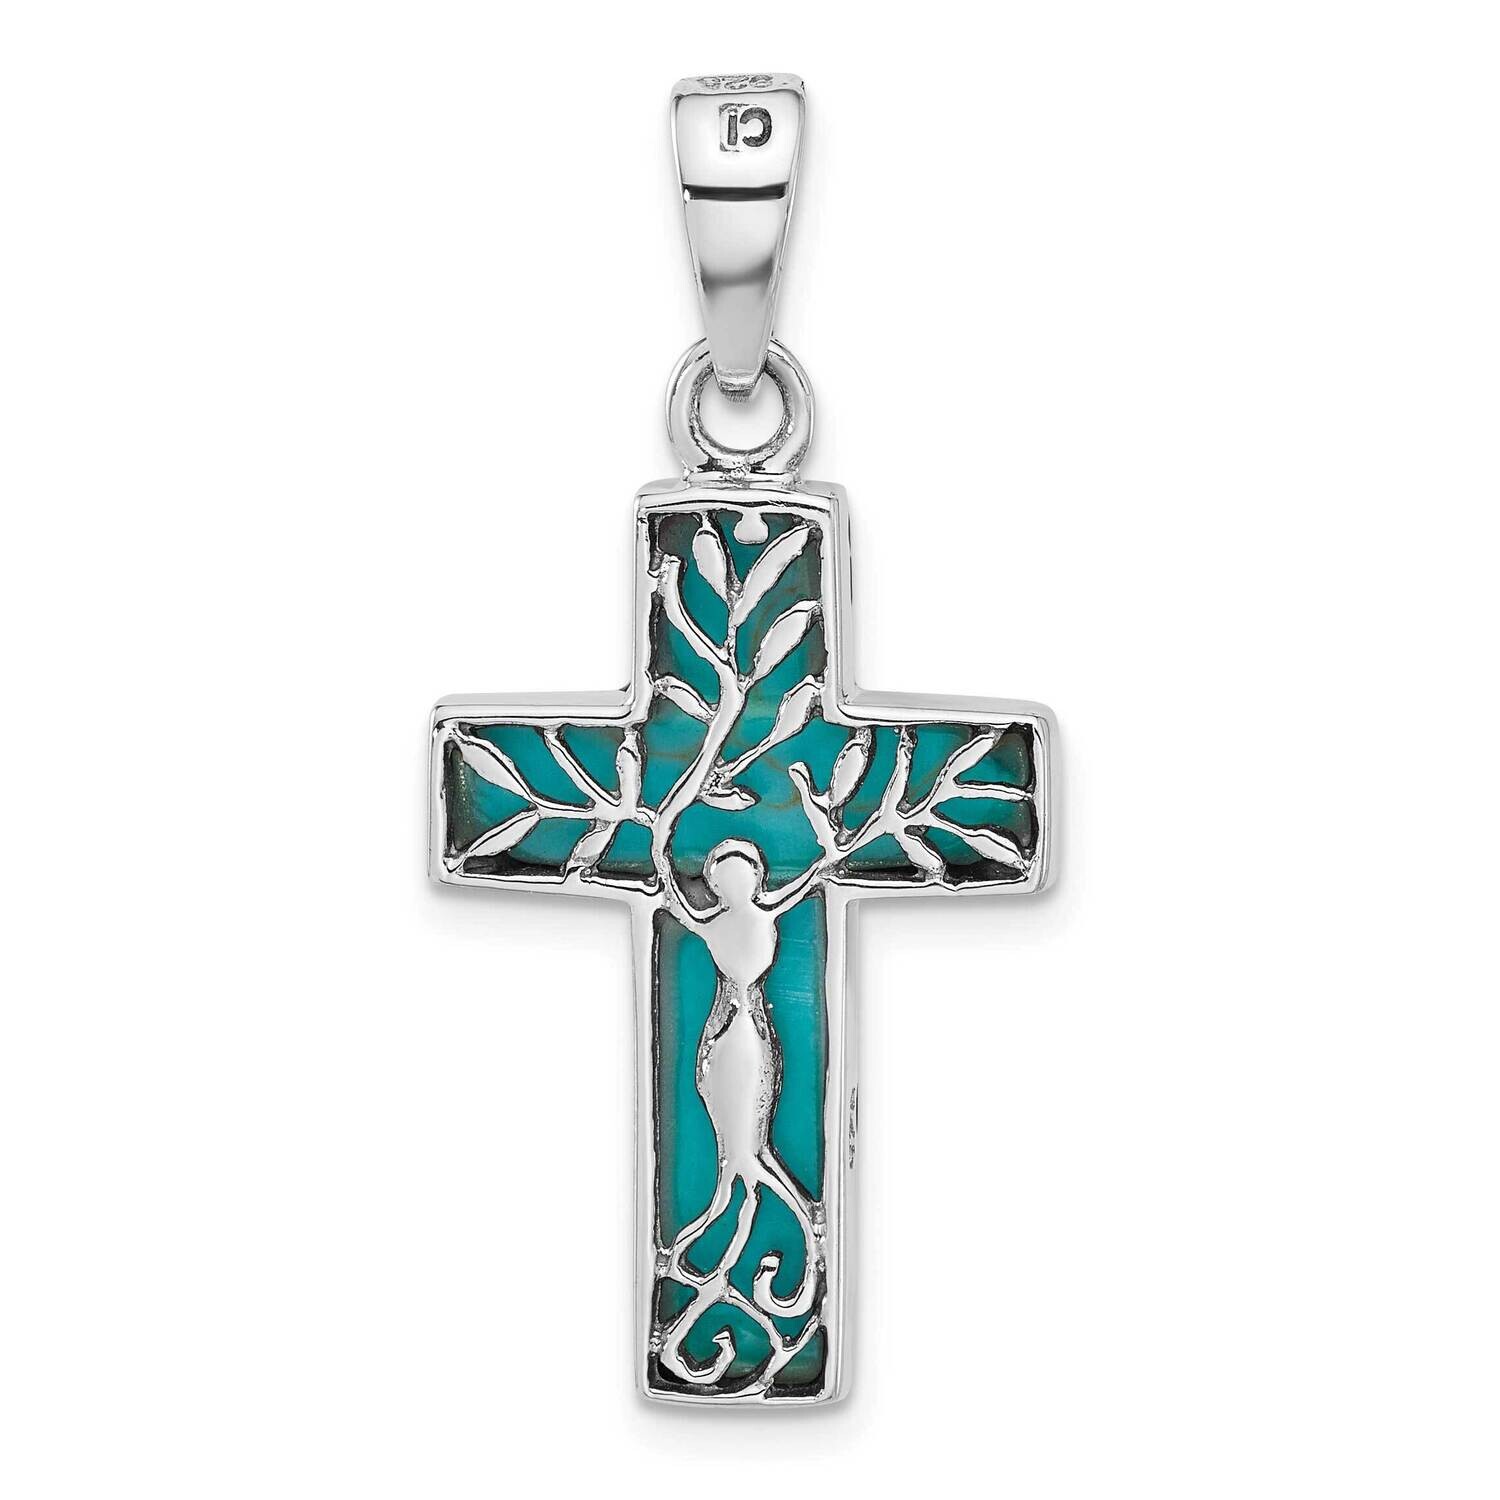 Reversible Reconstituted Turquoise Cross Pendant Sterling Silver Rhodium-Plated QC11459